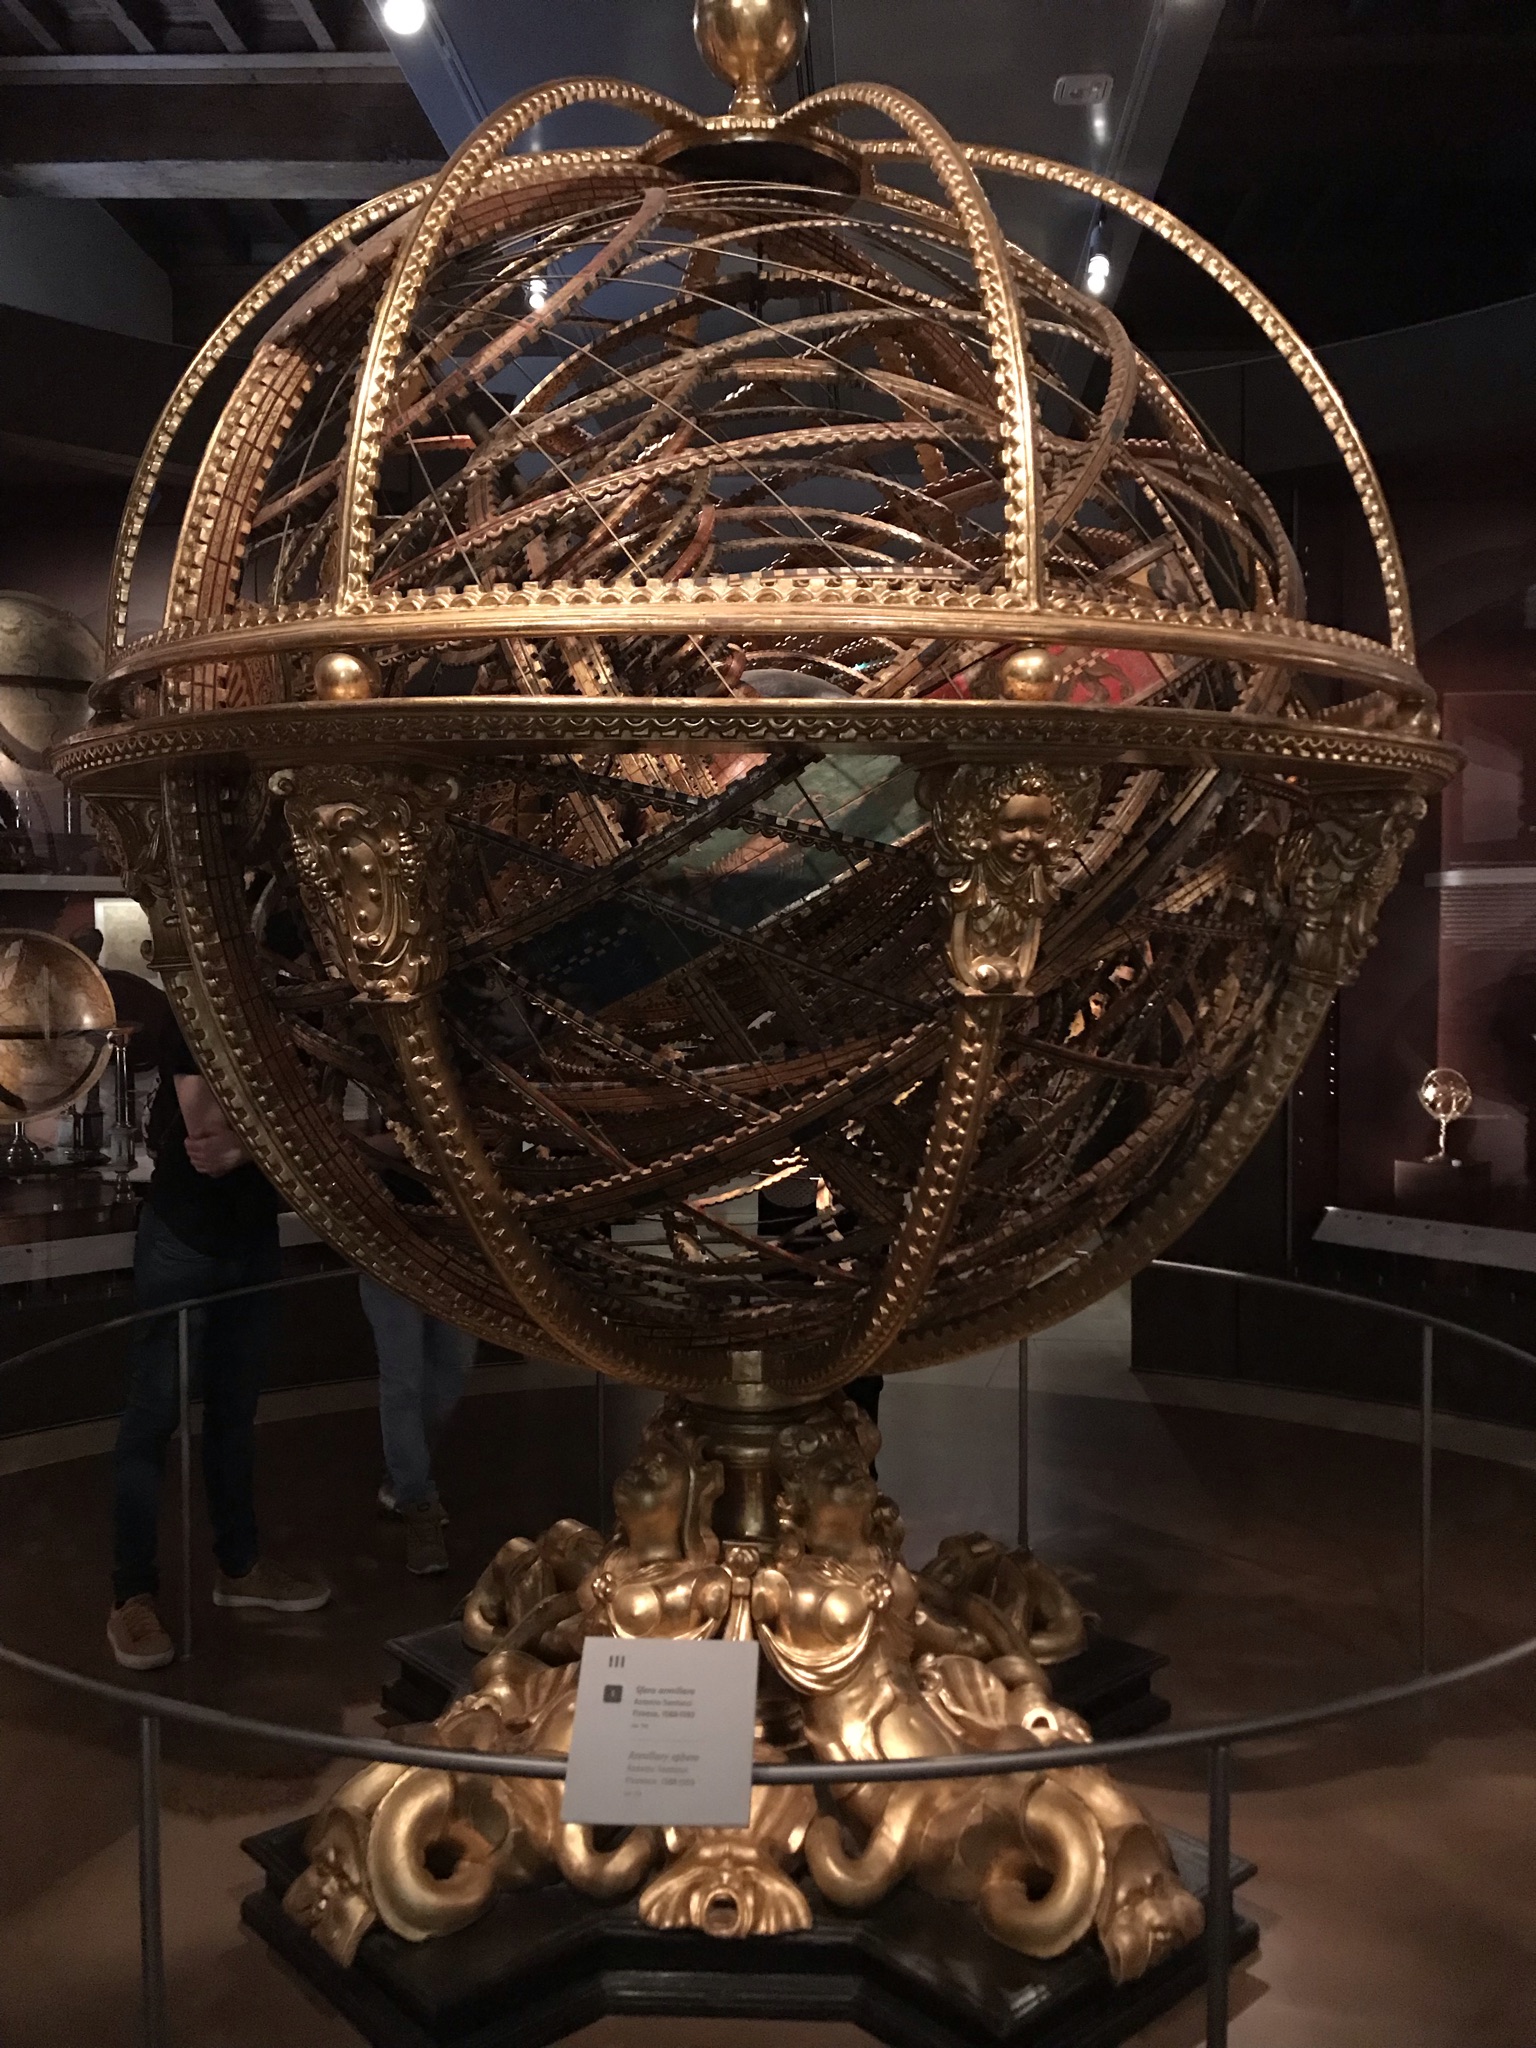 The armillary sphere of Antonio Santucci at the Museo Galileo in Florence.